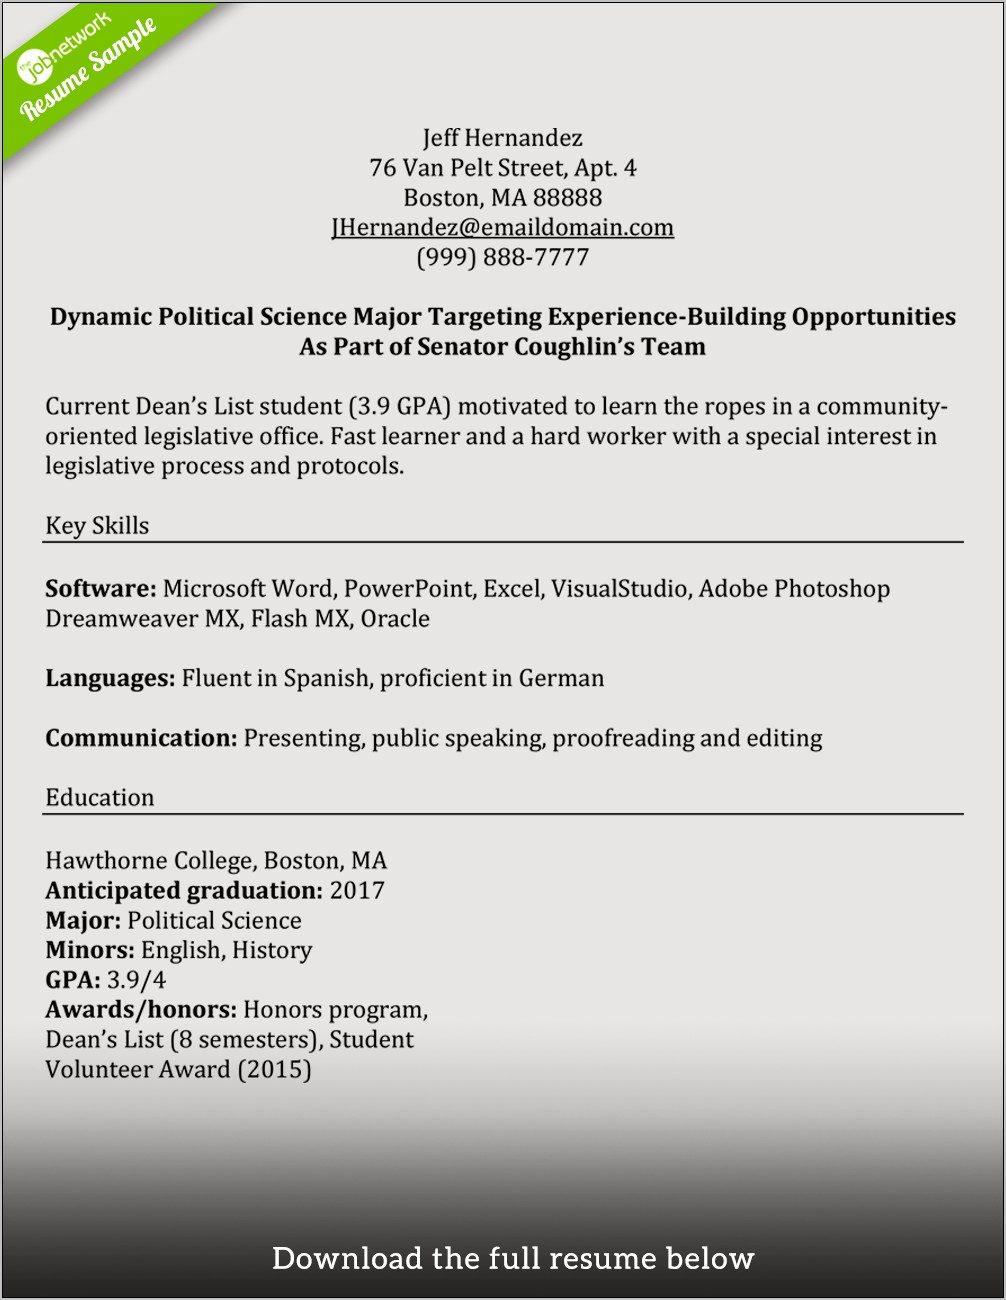 Does State Department Internship Look Good On Resume